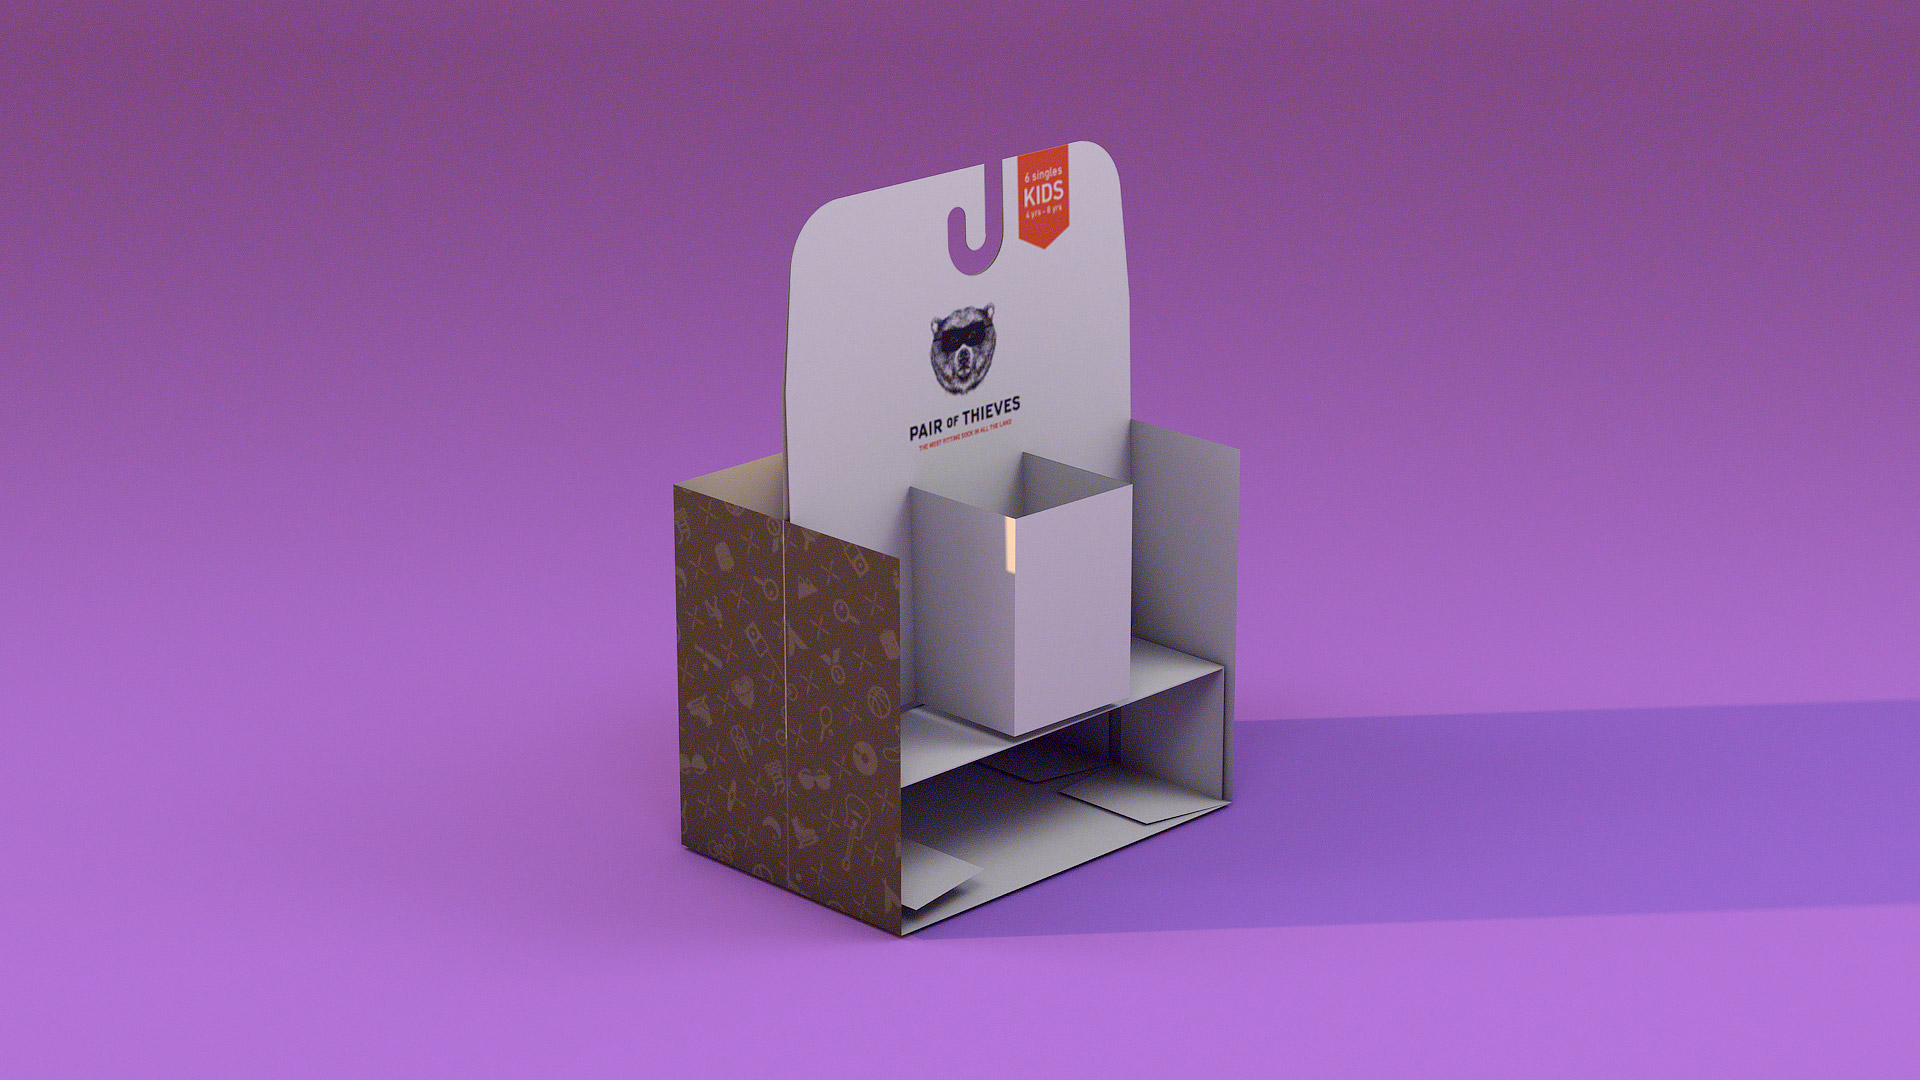 An image of a custom "six pack" sock holder for the Pair of Thieves sock & underwear brand, placed against a purple background.